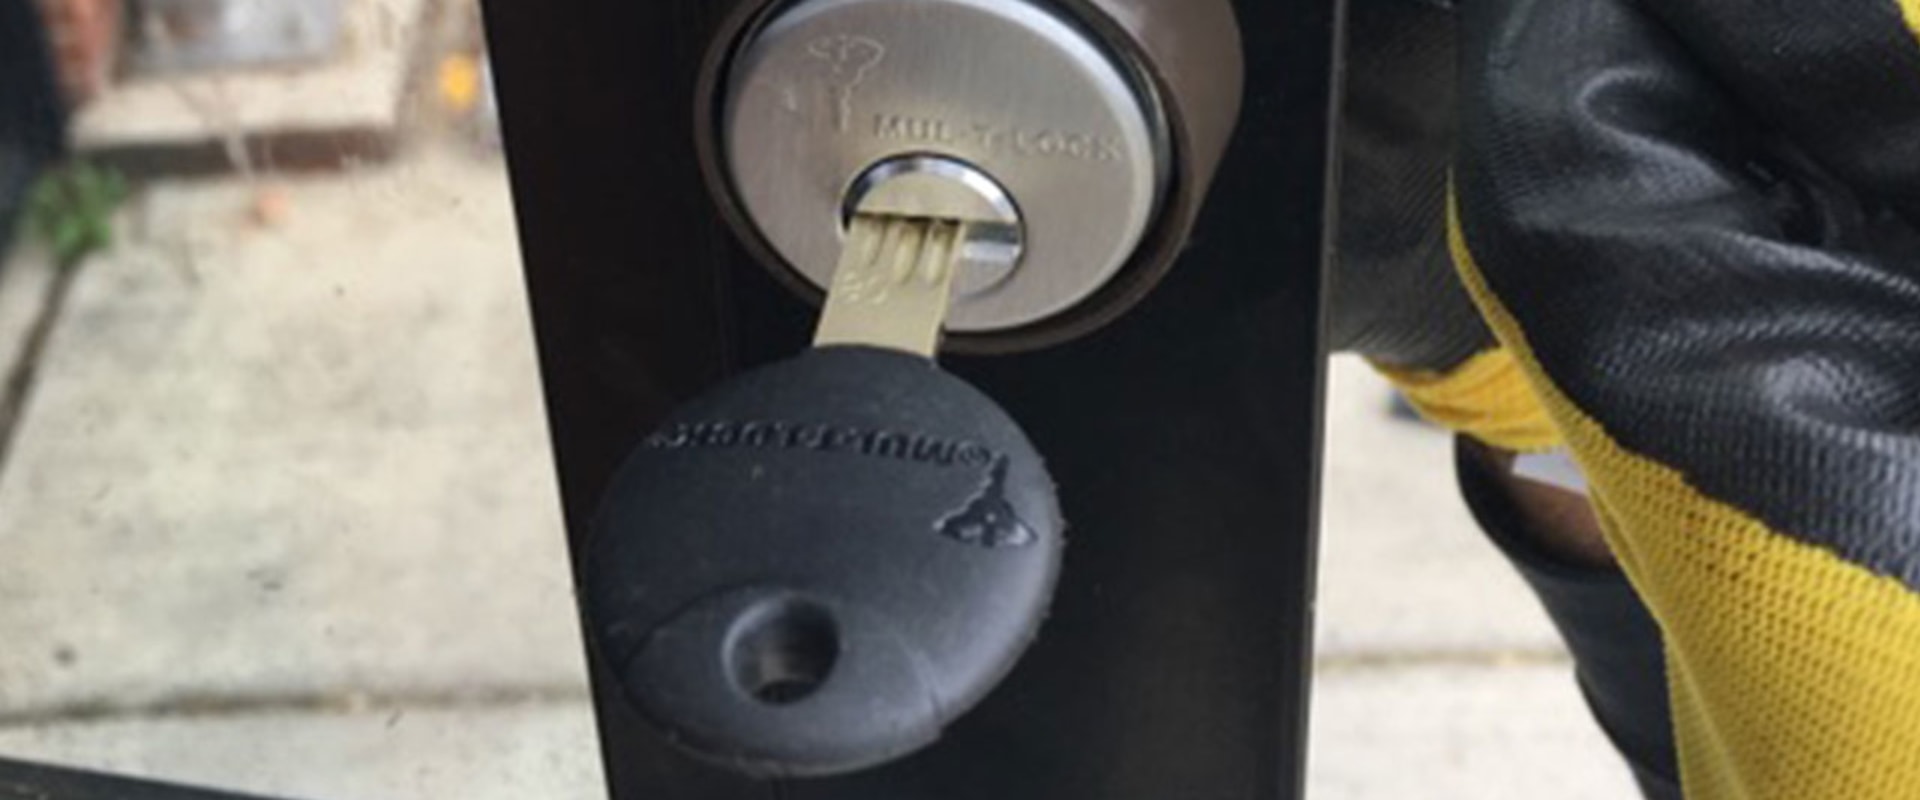 The Secrets of Unlocking a House Door: Tips from a Professional Locksmith